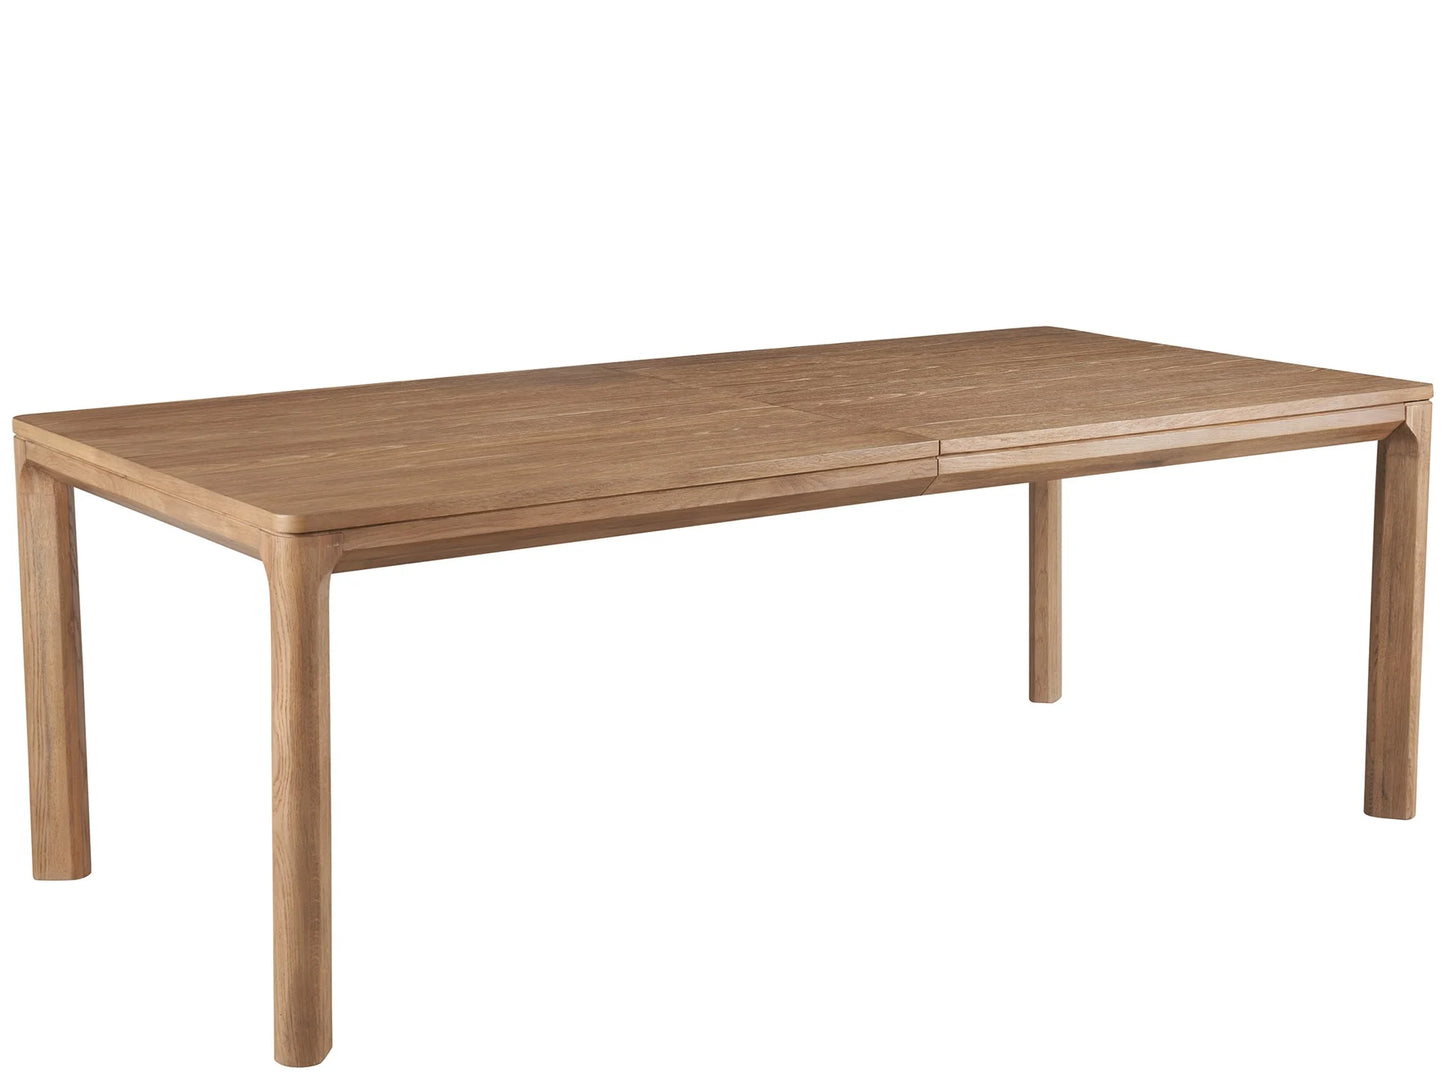 UNIVERSAL - NEW MODERN MALONE DINING TABLE